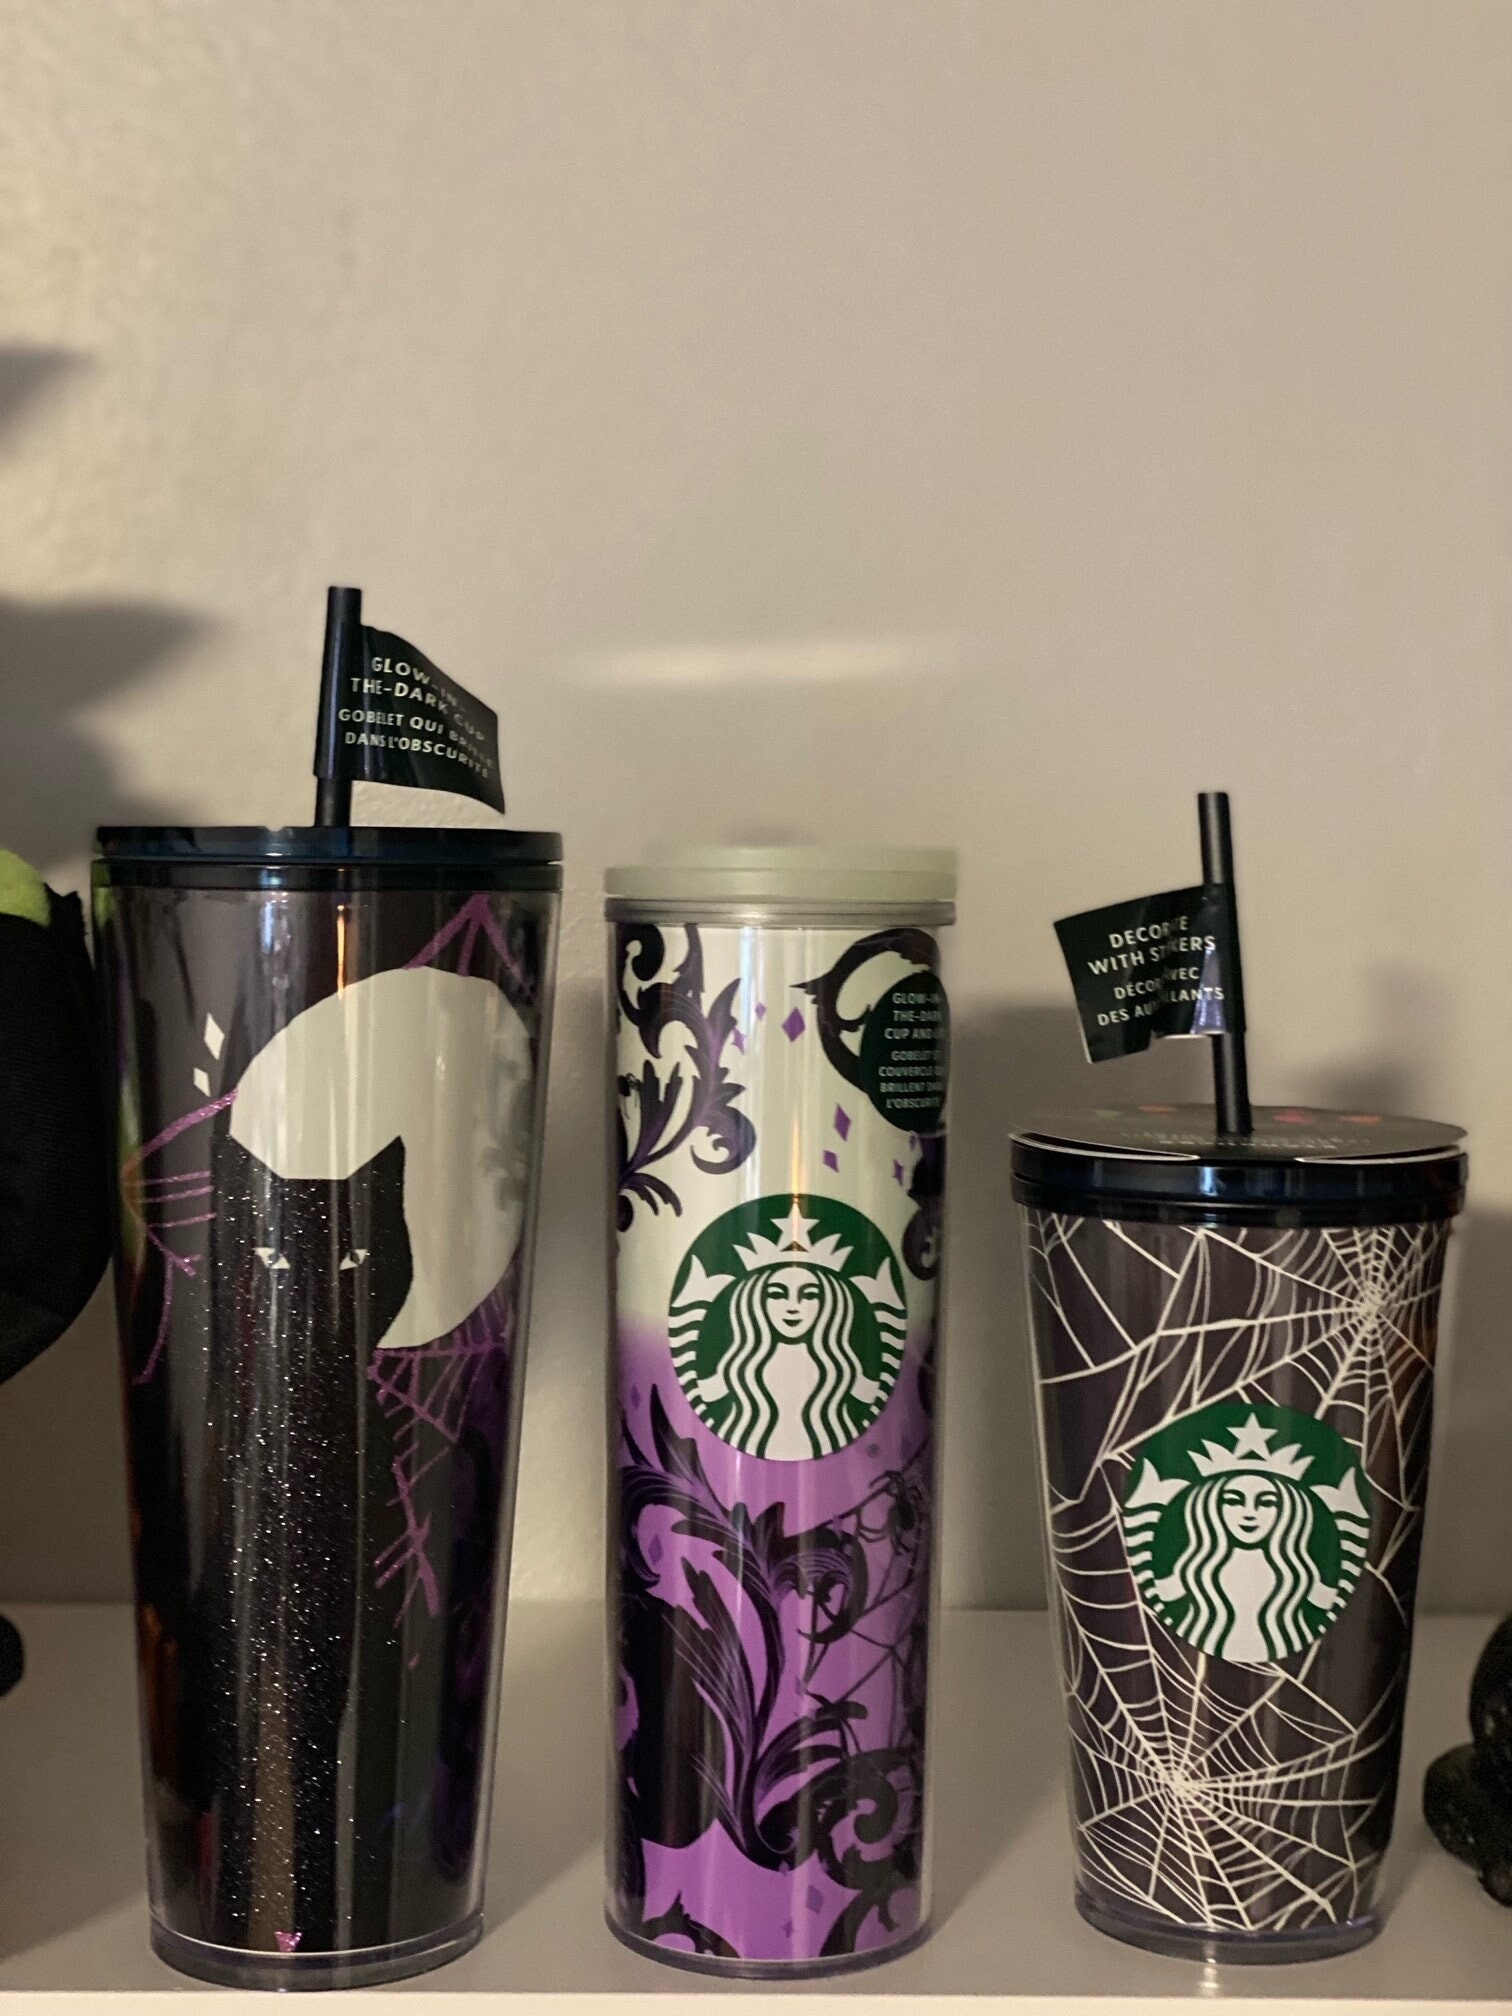 2021 Hot Limited Edition Starbucks Cup Colorful Fishtail Cup Coffee Glass  Mug